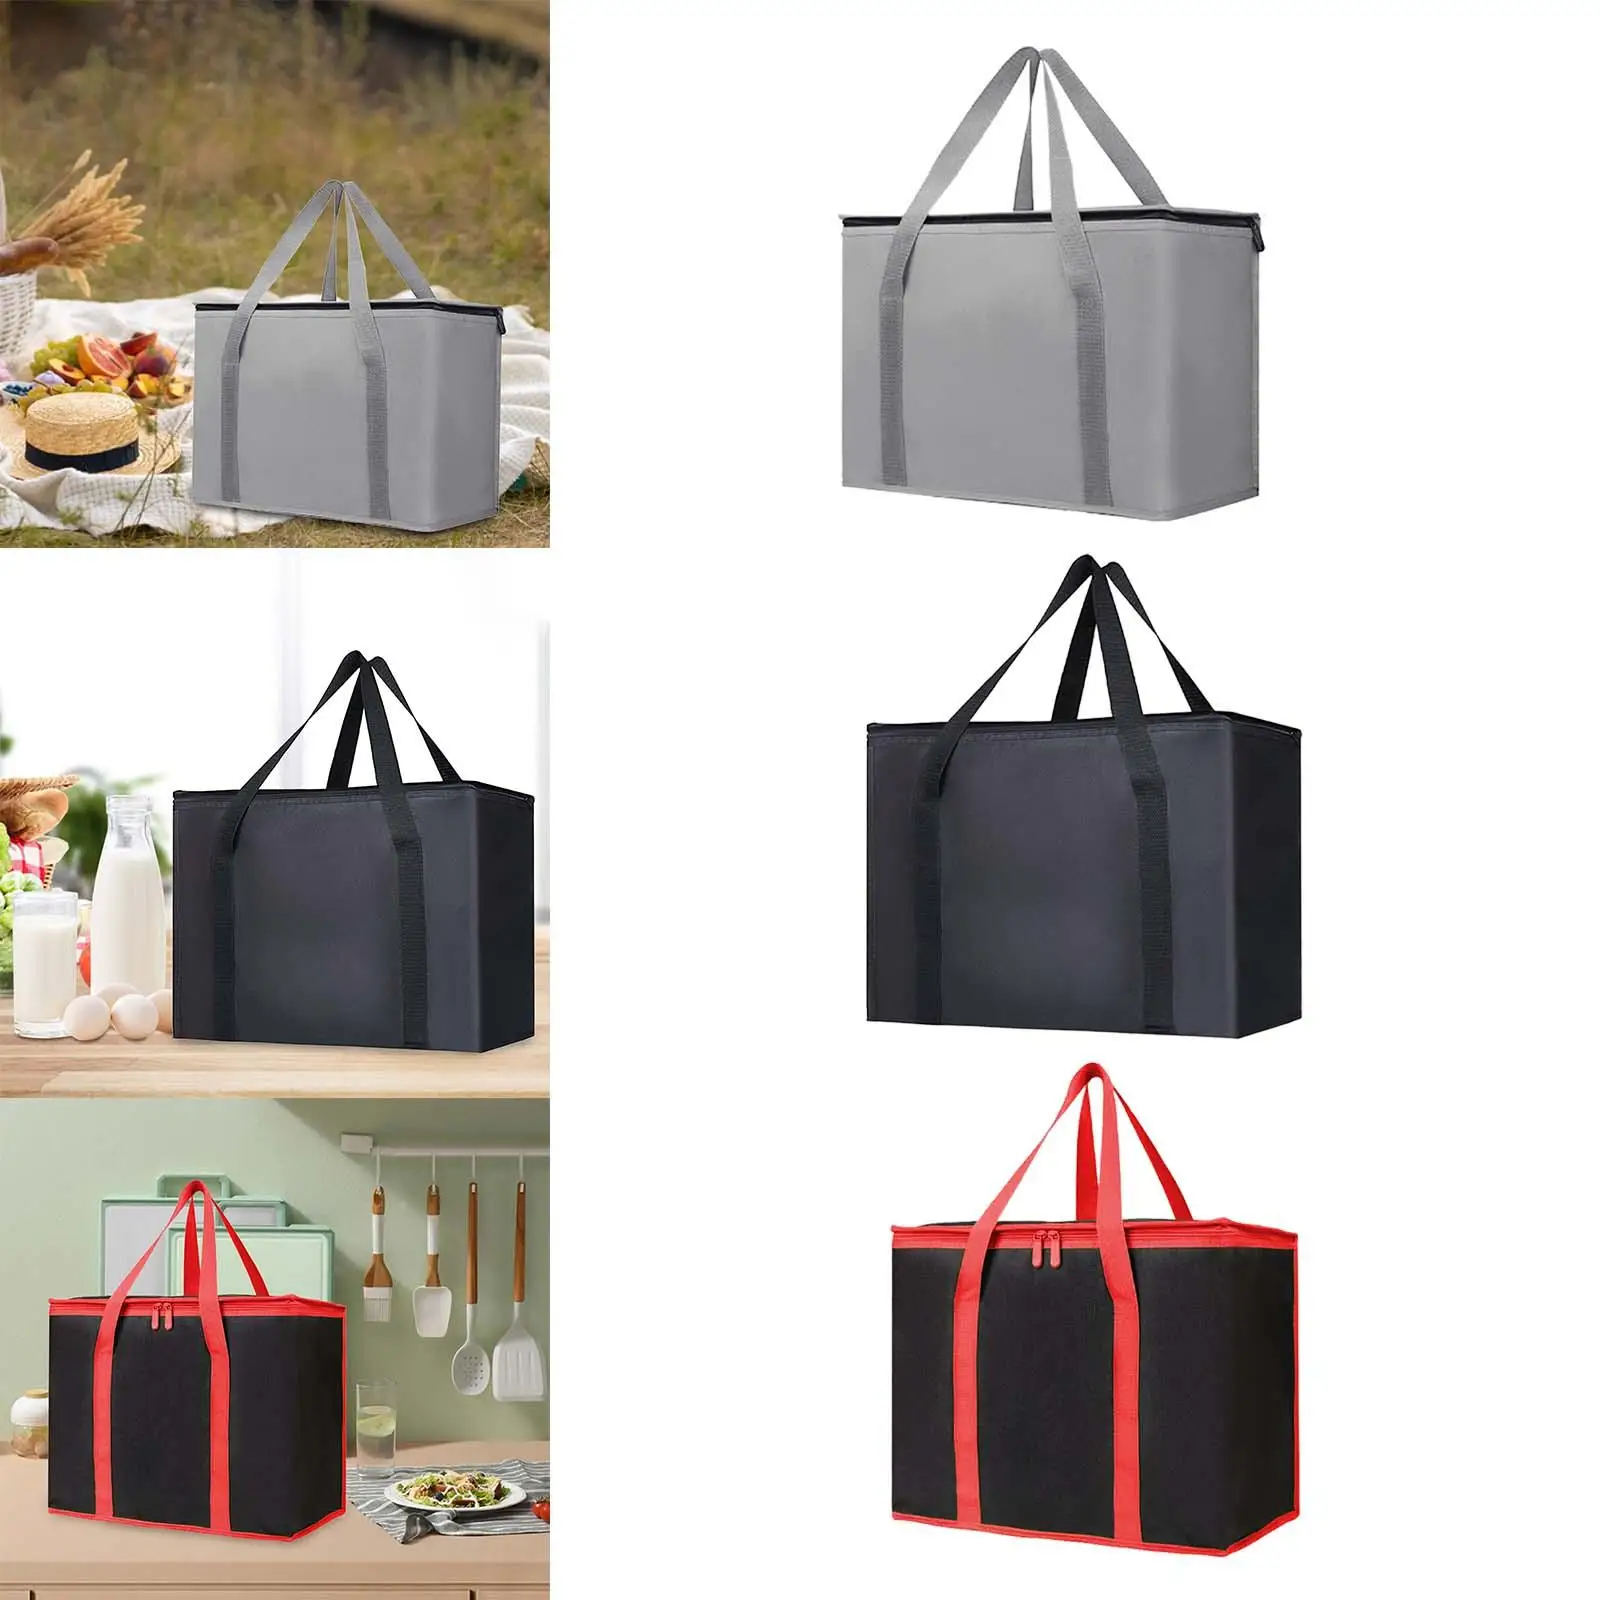 Insulated Cooler Bag Thermal Reusable Non Woven Insulated Bag Grocery Shopping Bag for Outdoor Fishing Beach Picnic Travel